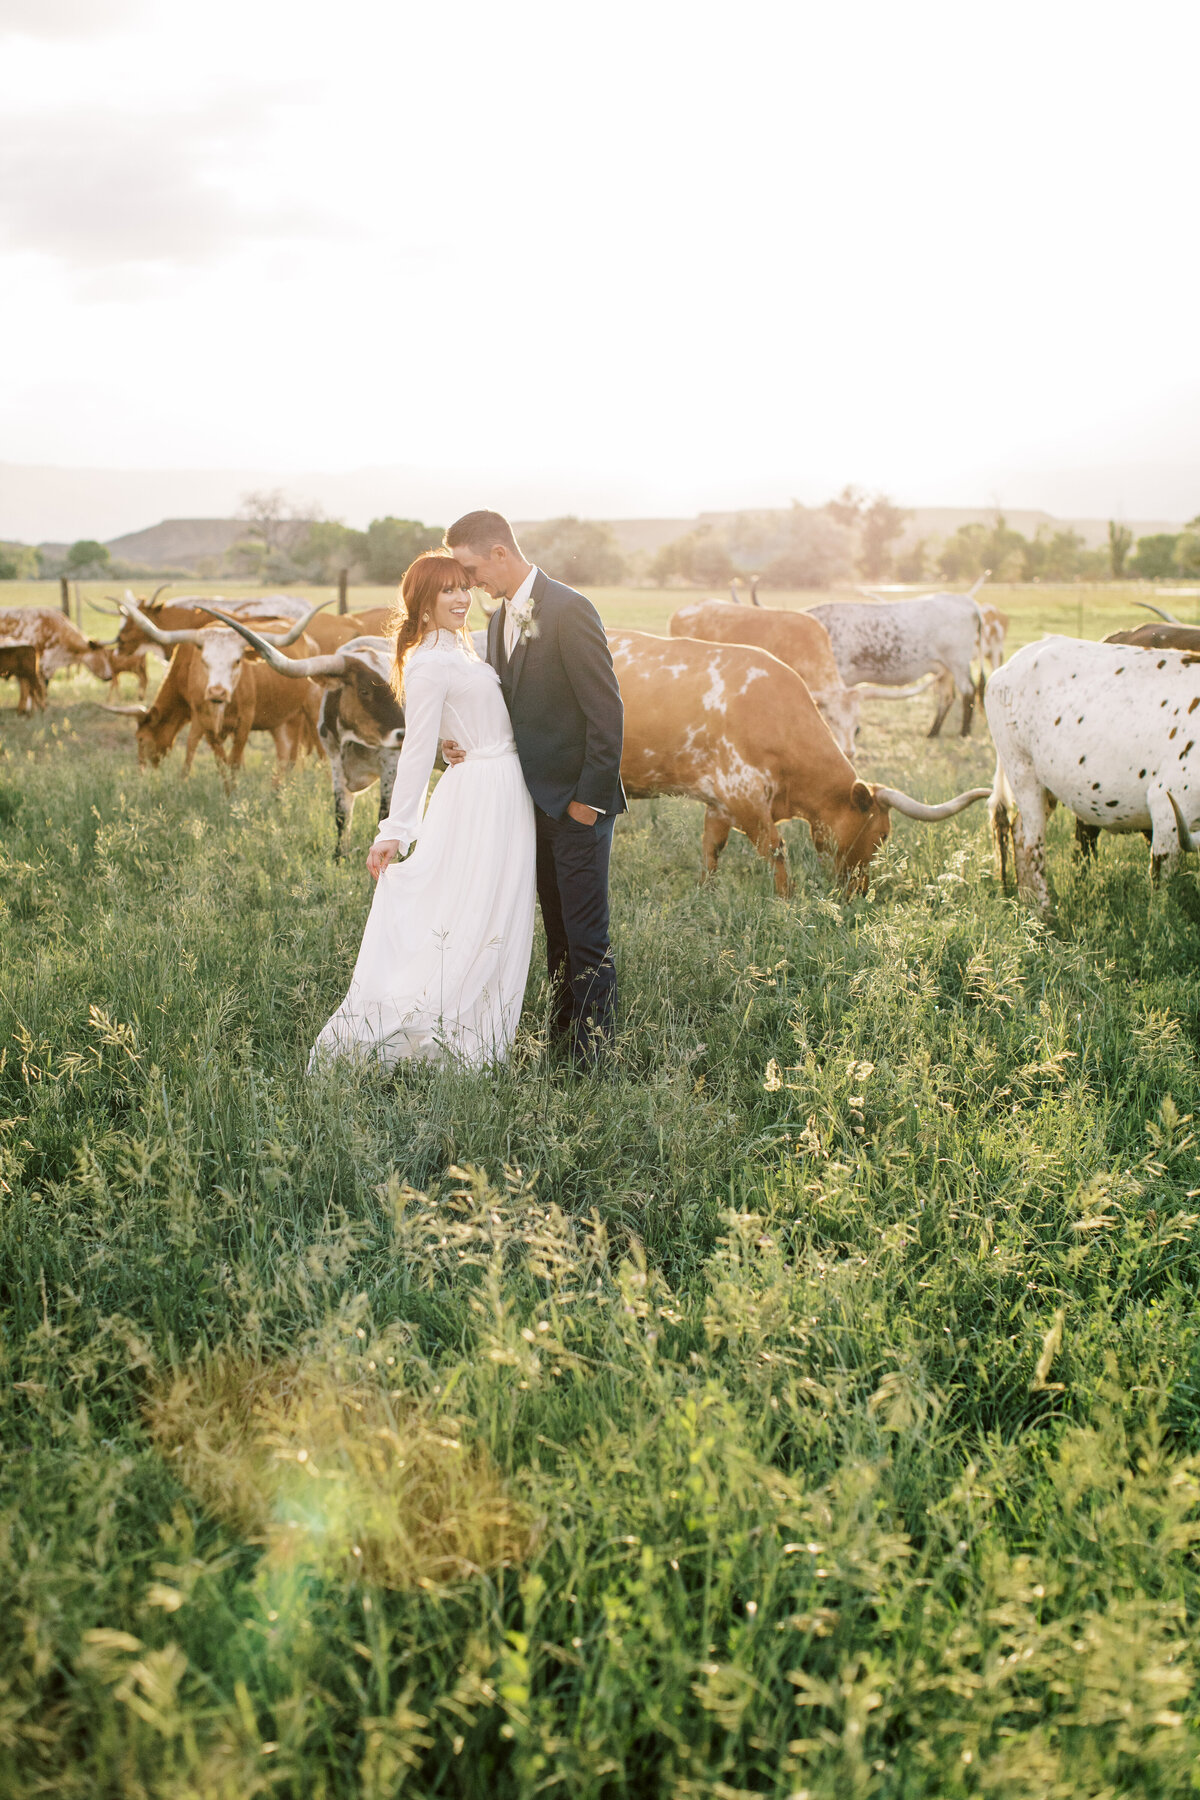 when-you-say-nothing-at-all-rustic-wedding-high-western-fashion-utah-1133